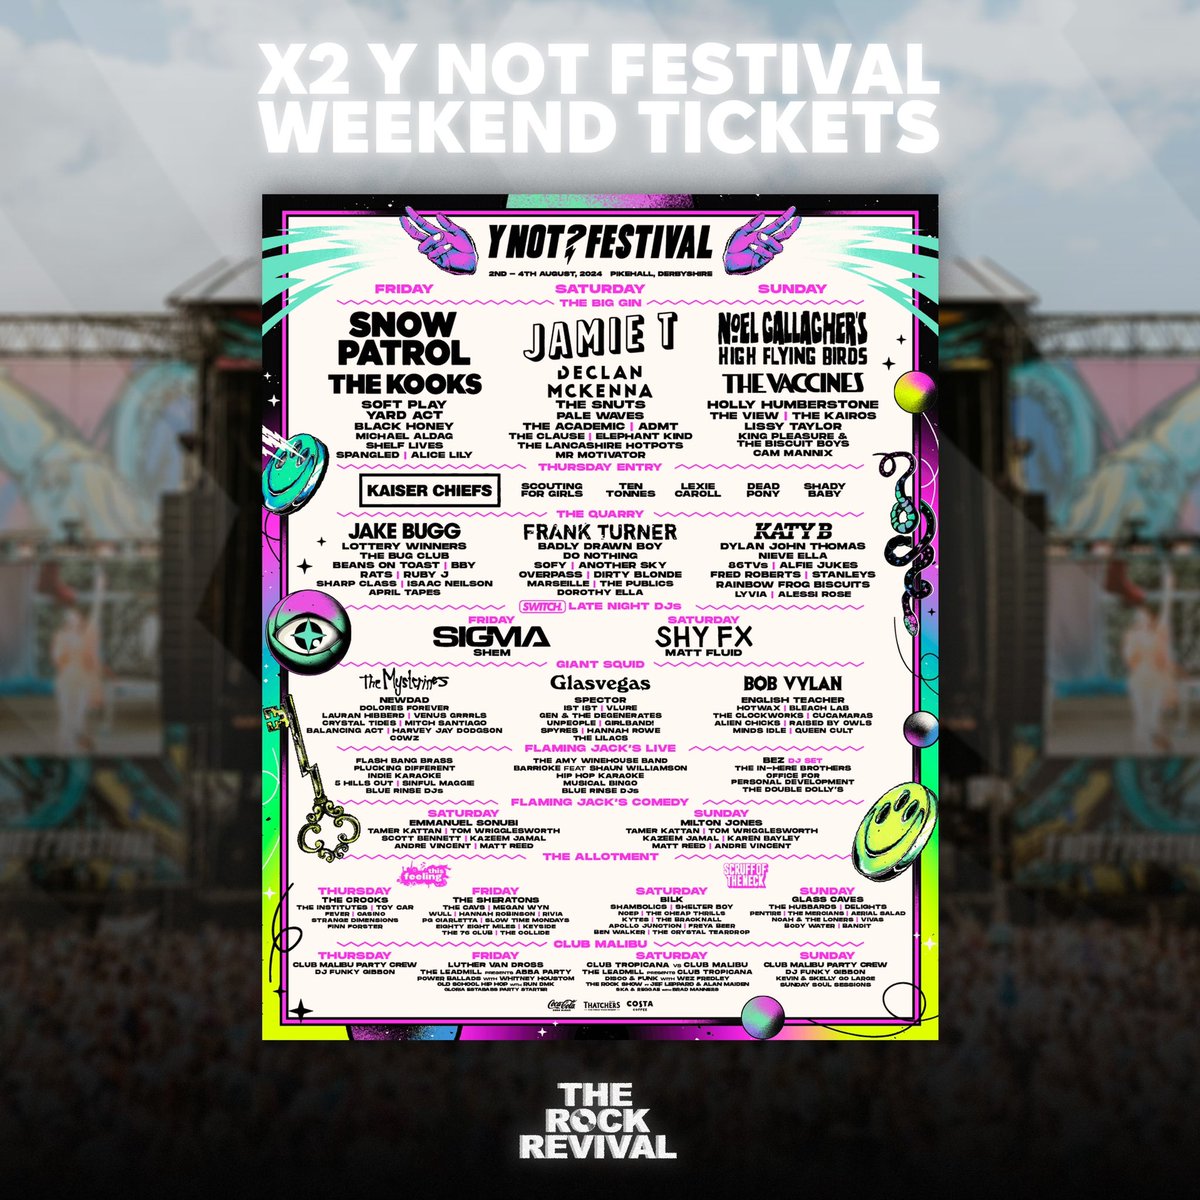 For a chance to win X2 @ynotfestival weekend tickets 🎫 -Like and RT -Follow @therockrevival_ & @ynotfestival -Tag a mate P.S. Follow on Instagram for a double chance!